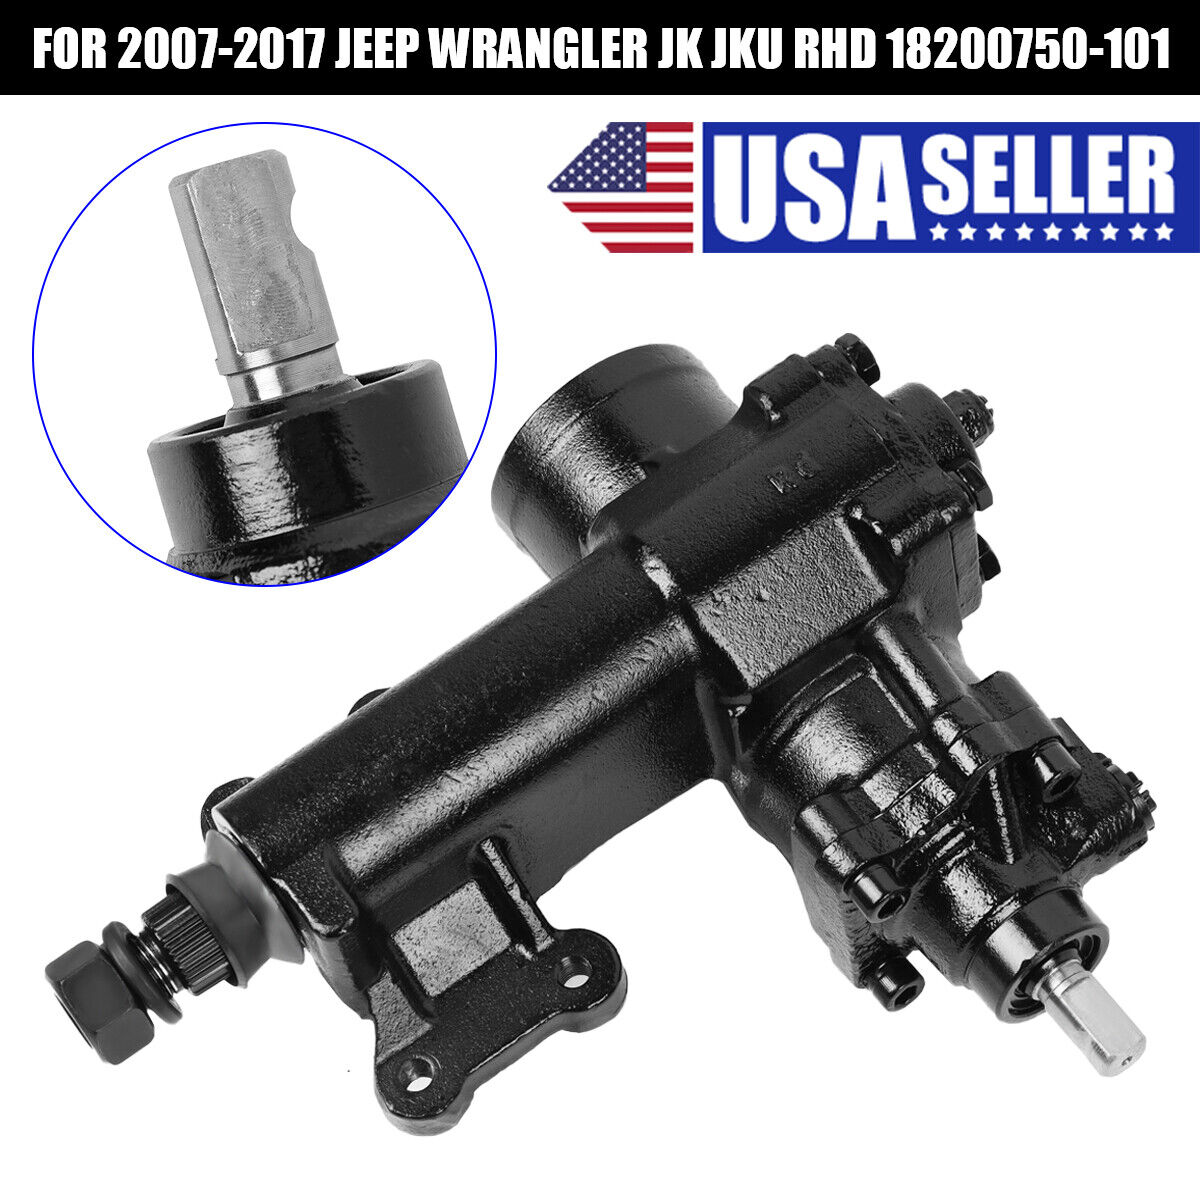 Right Hand Drive Power Steering Gear Box For 2007-2017 Jeep Wrangler 52126349AB.